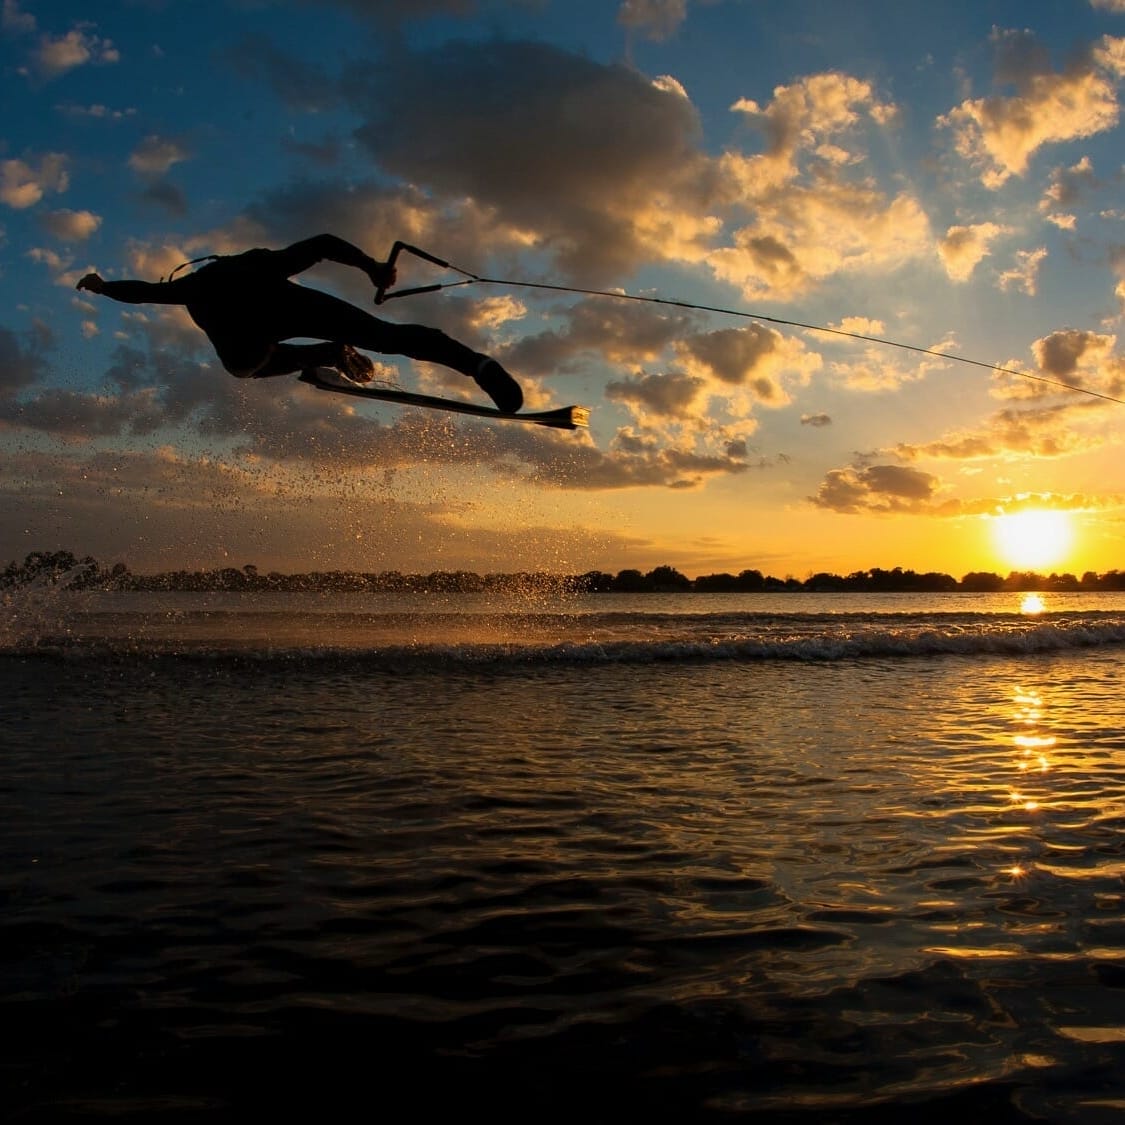 A person wakeboarding on a wakesurf board at sunset.